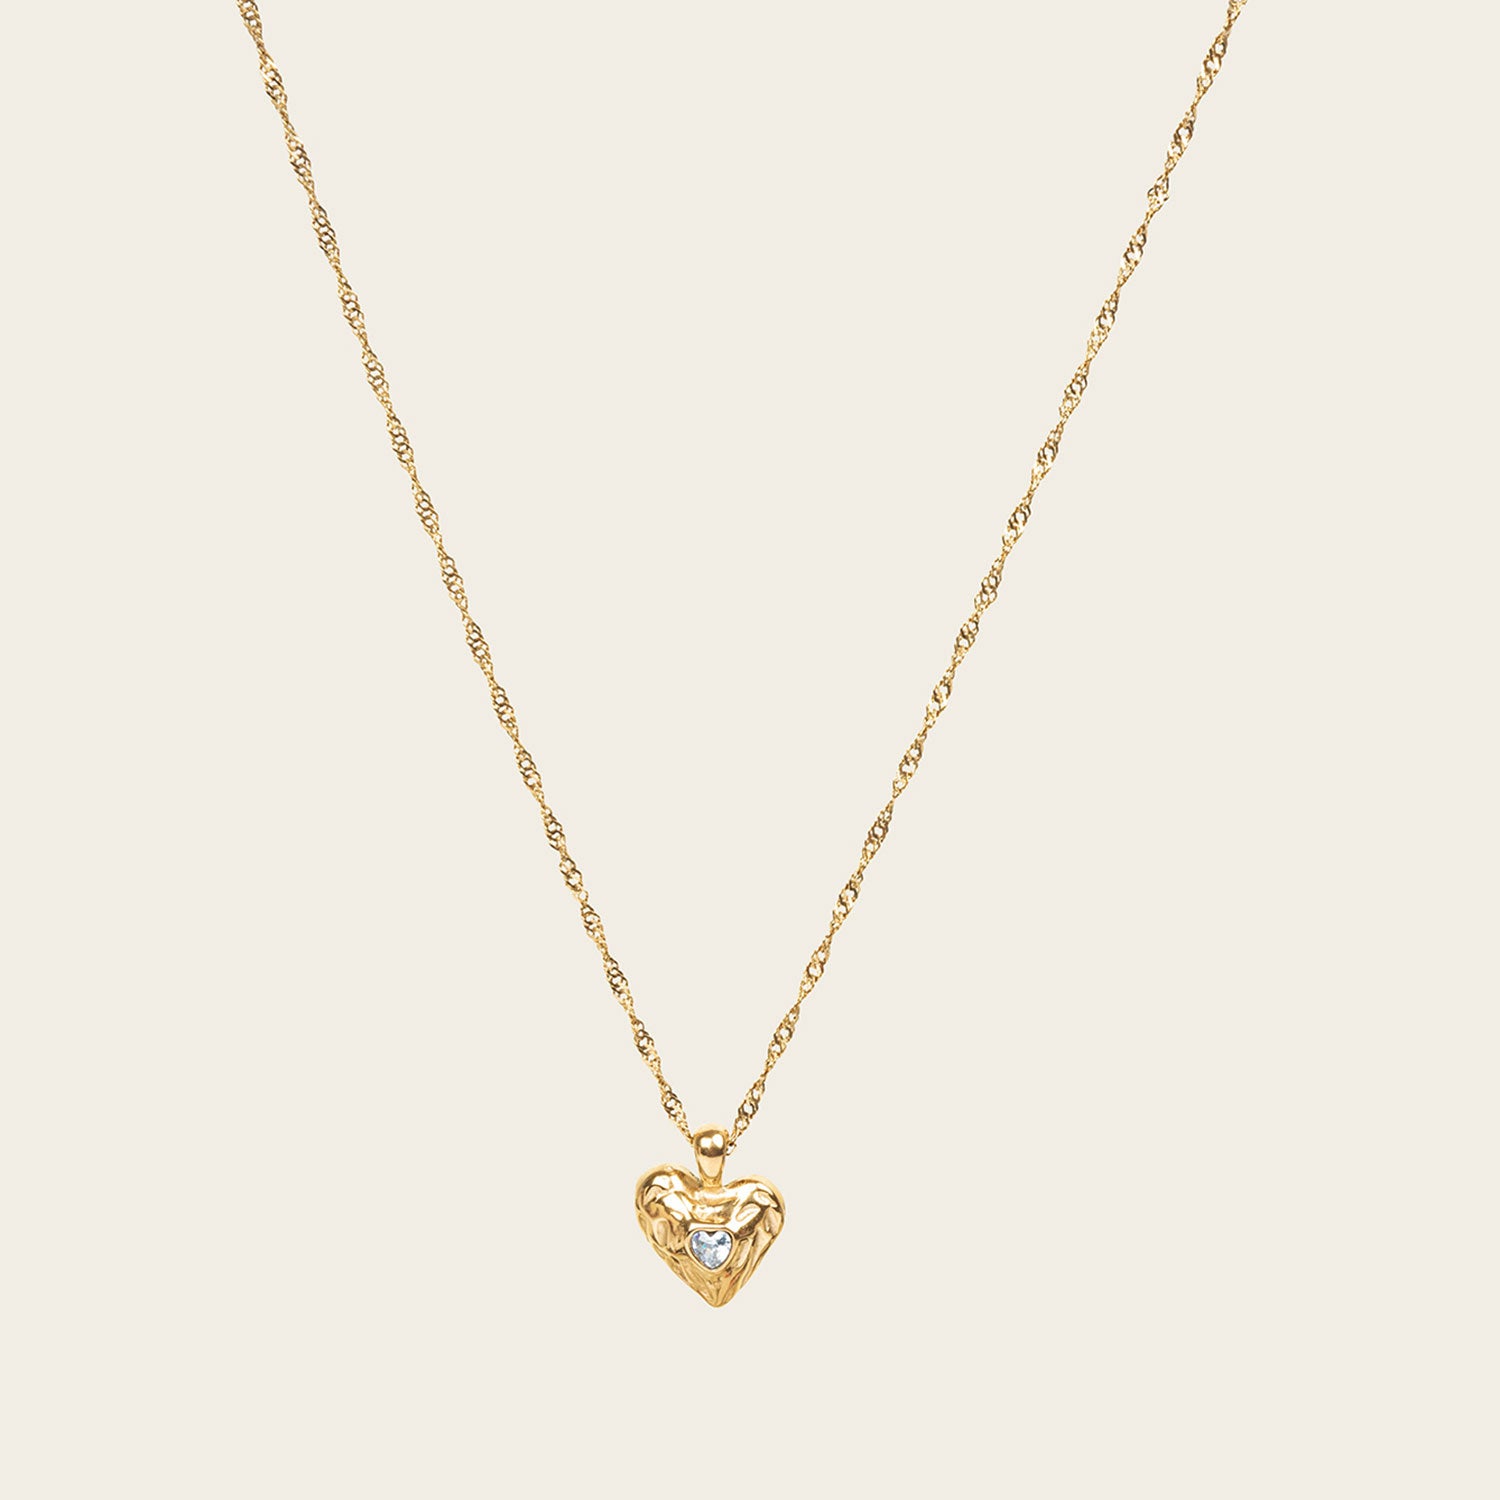 Image of the Textured Heart Pendant Necklace is crafted from 14K Gold Plated Stainless Steel with a Cubic Zirconia stone, and is non-tarnish, water resistant, and free from Lead, Nickel, and Cadmium. It is also adjustable and has only one necklace included.